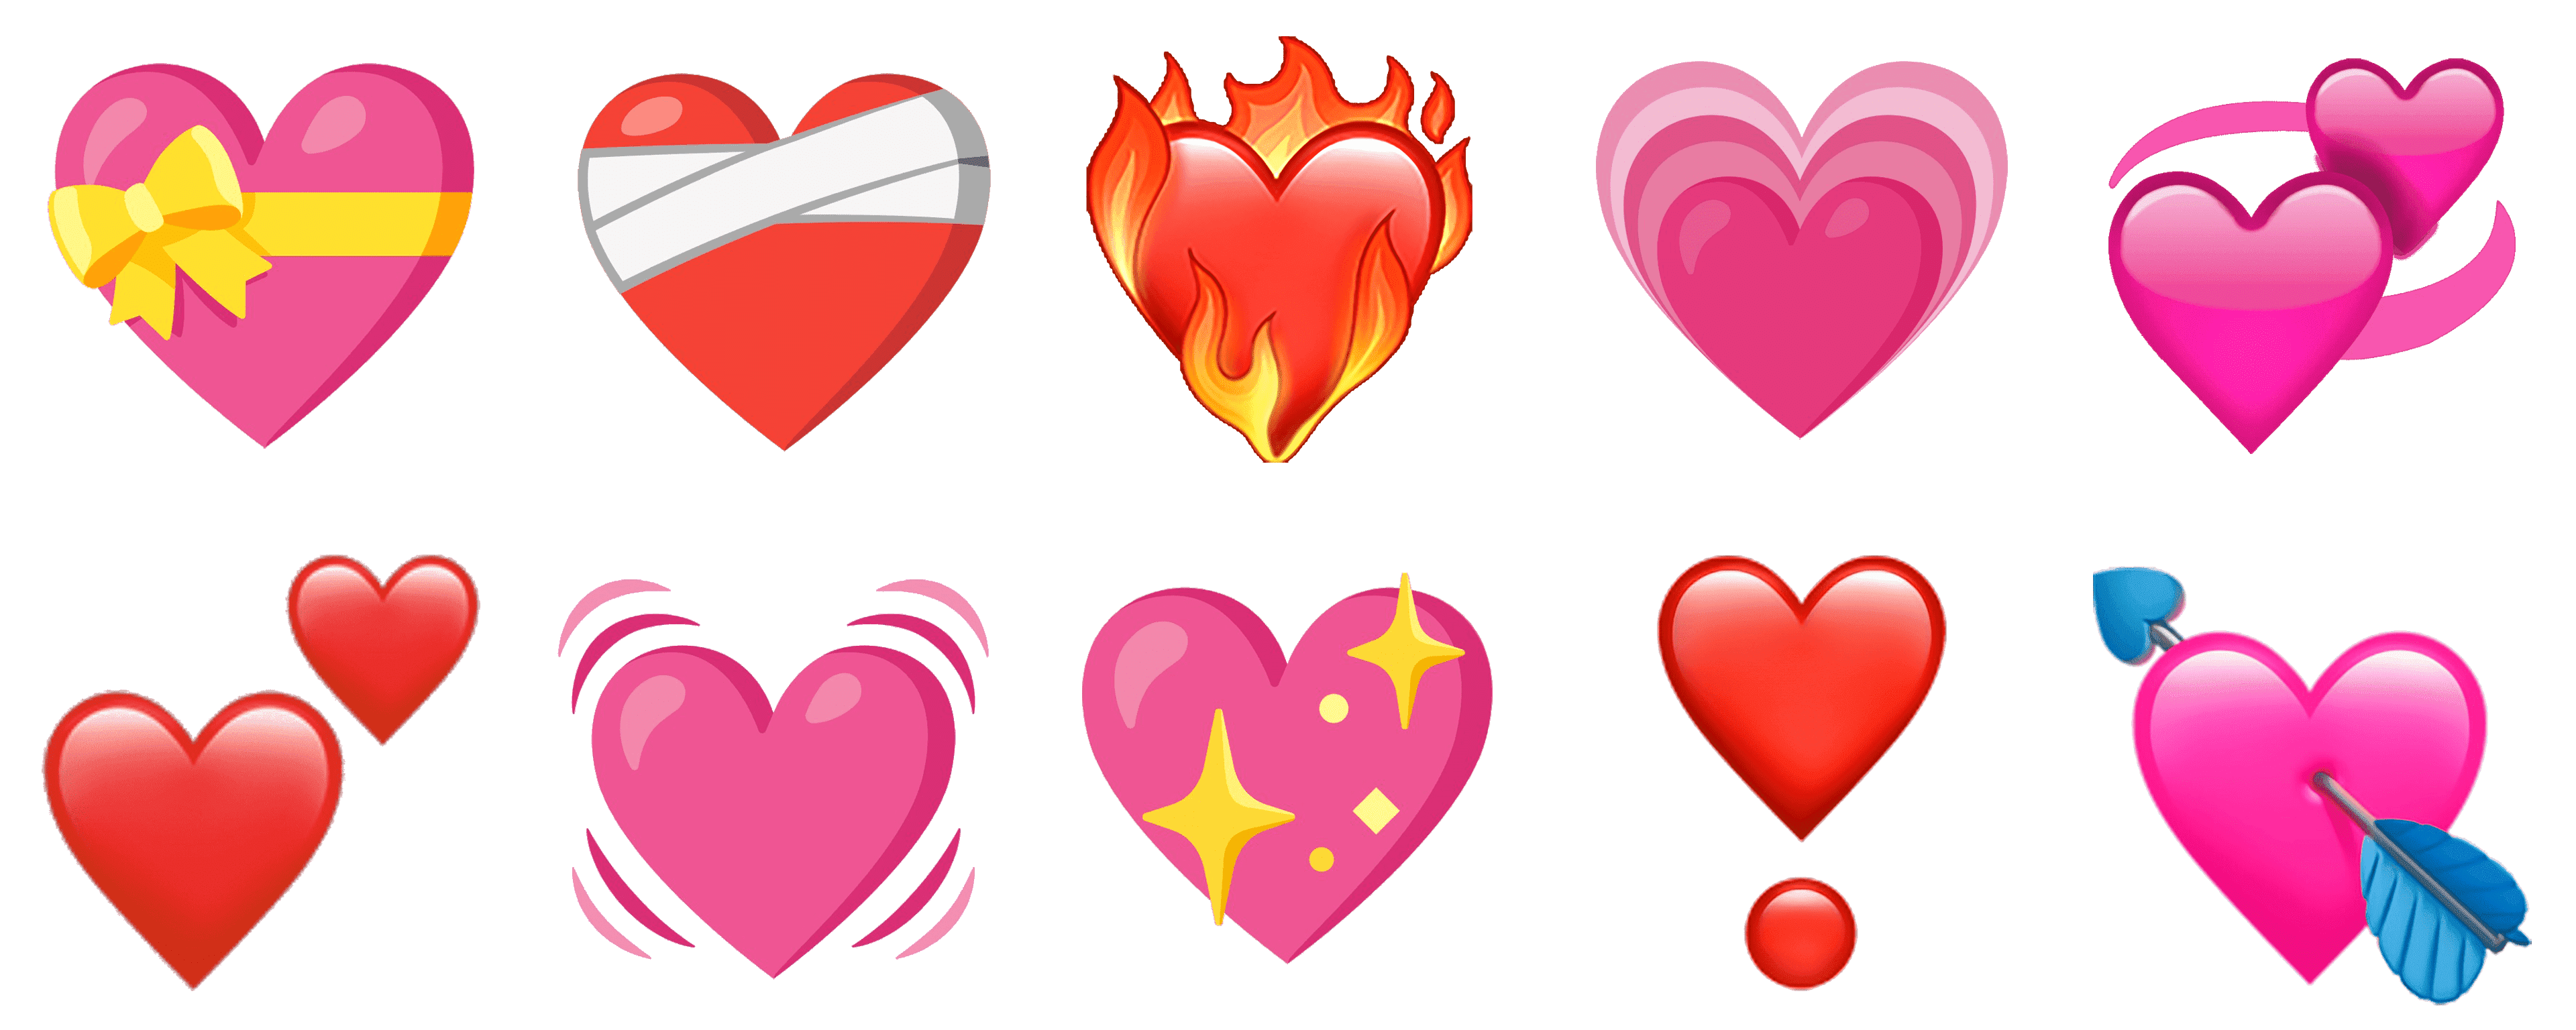 True meanings of different heart emojis